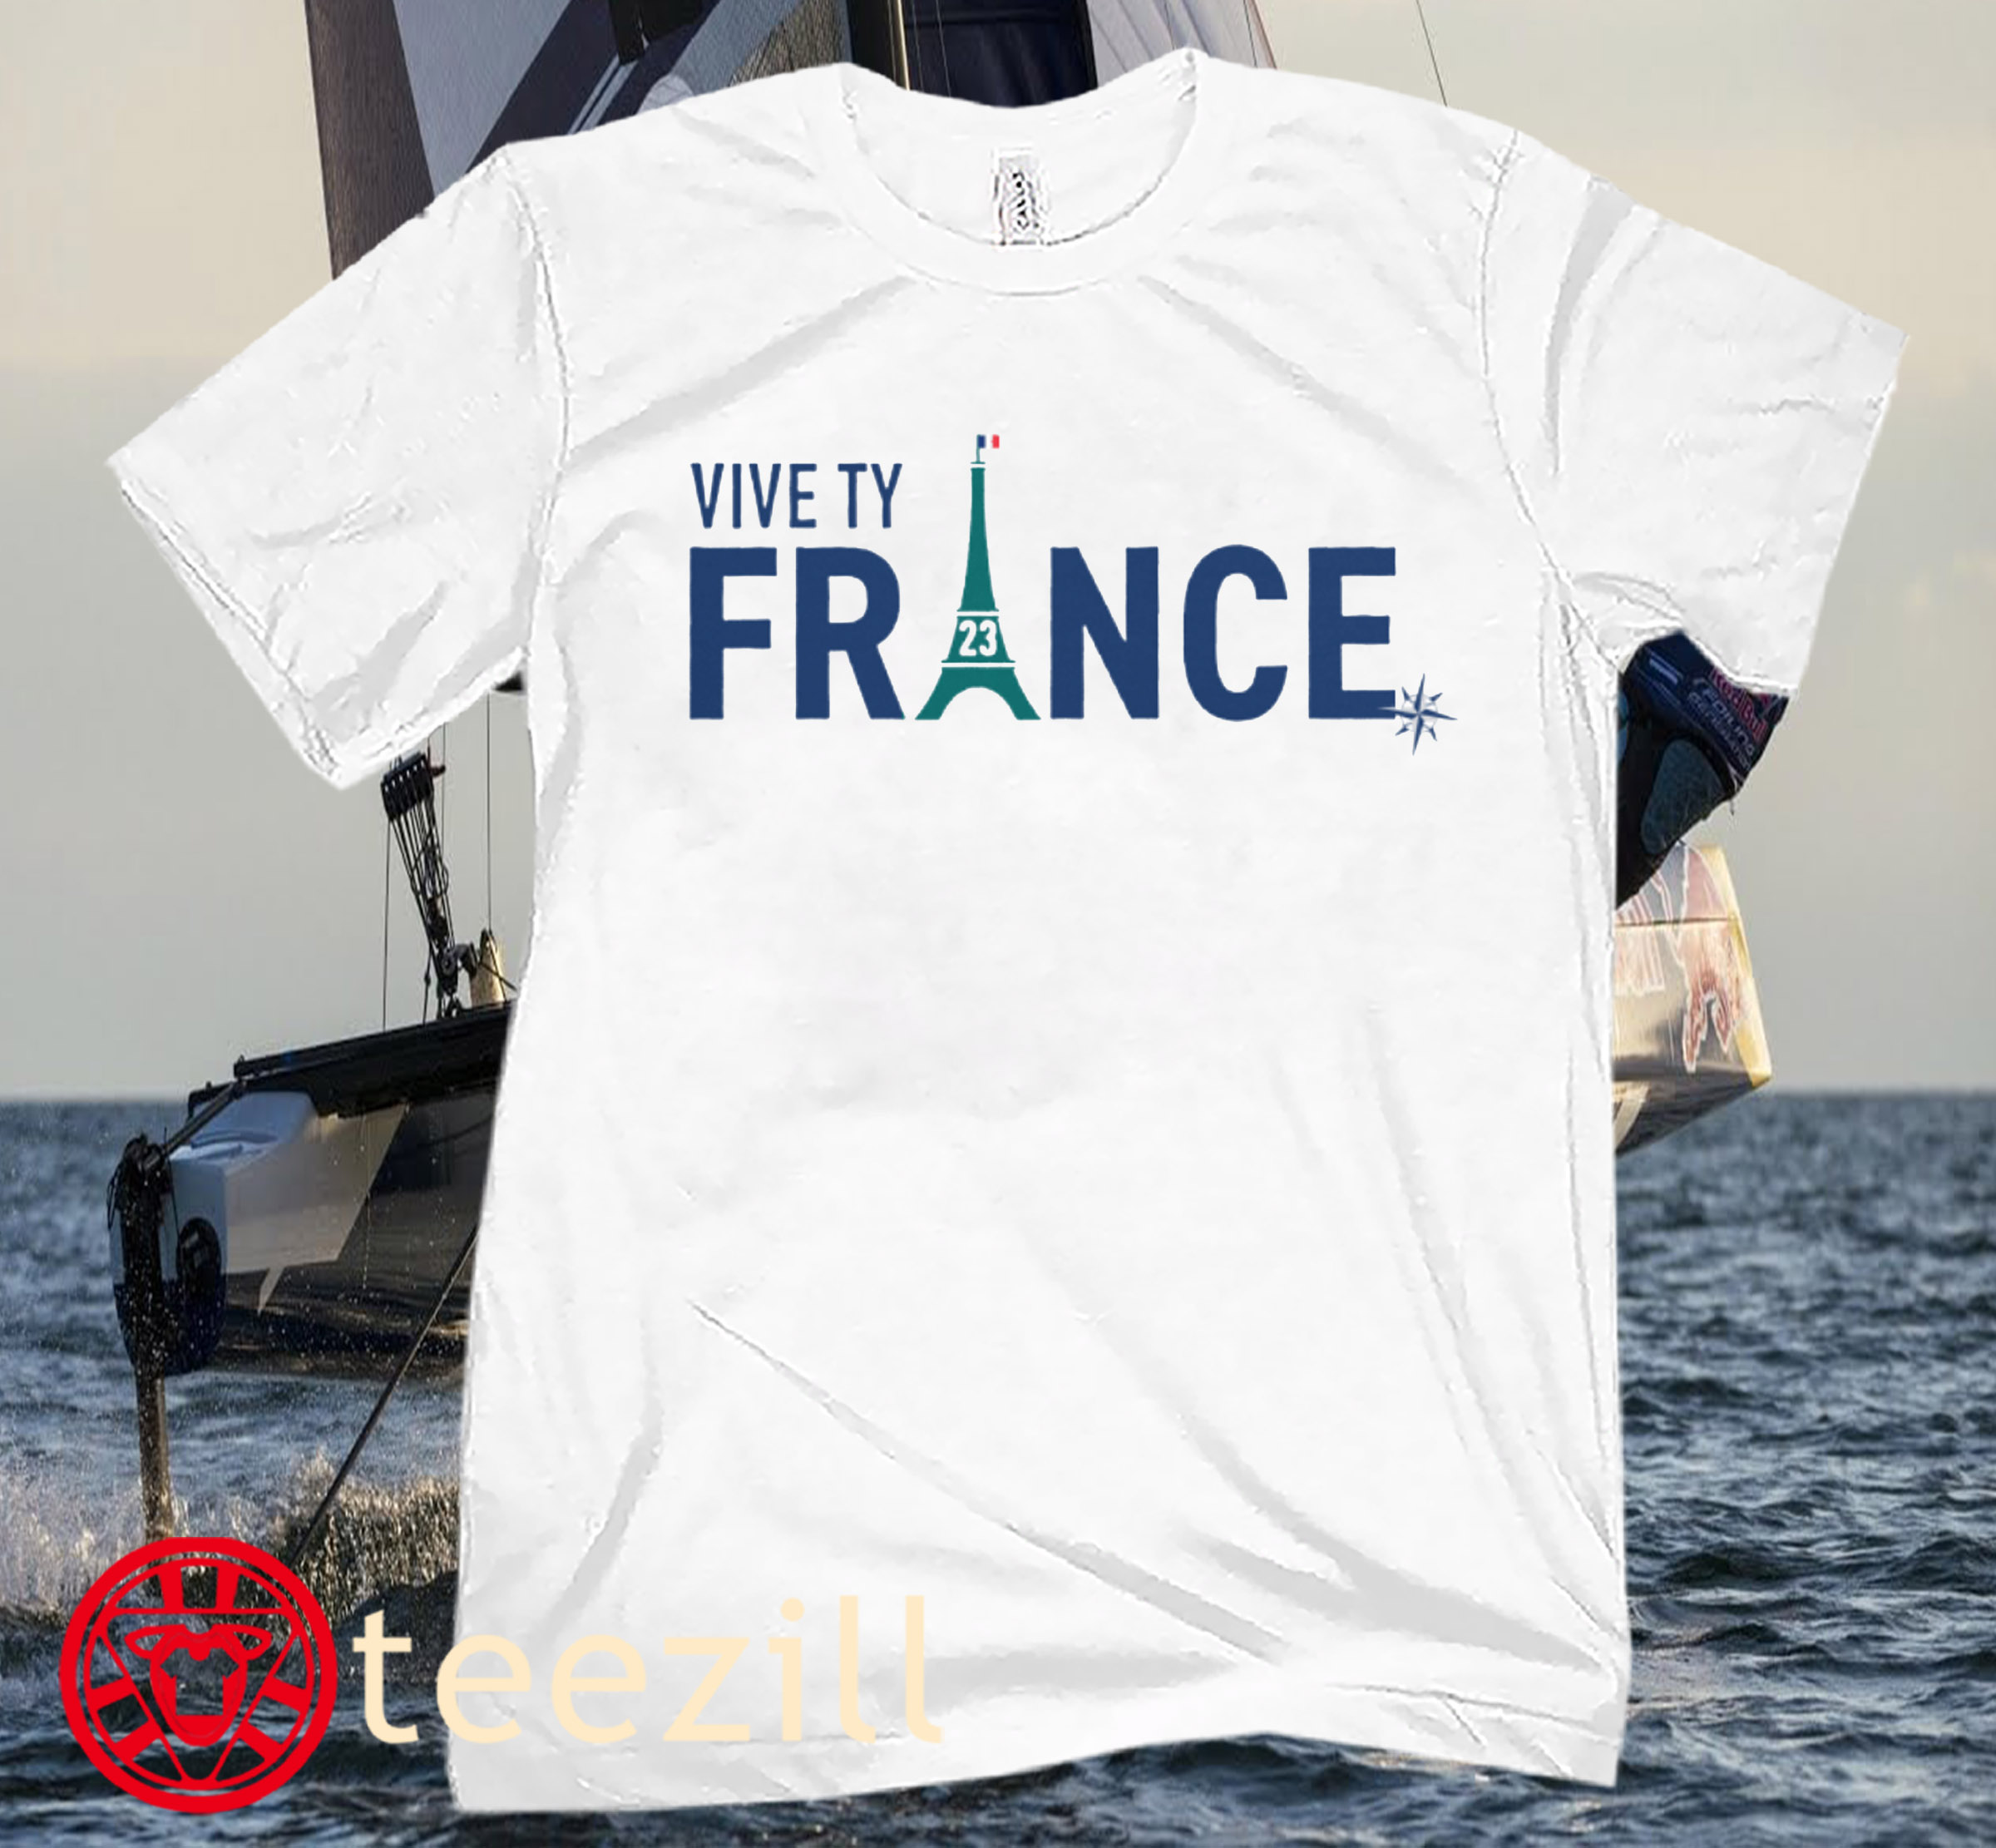 South of France Night - Vive Ty France Shirts - teezill